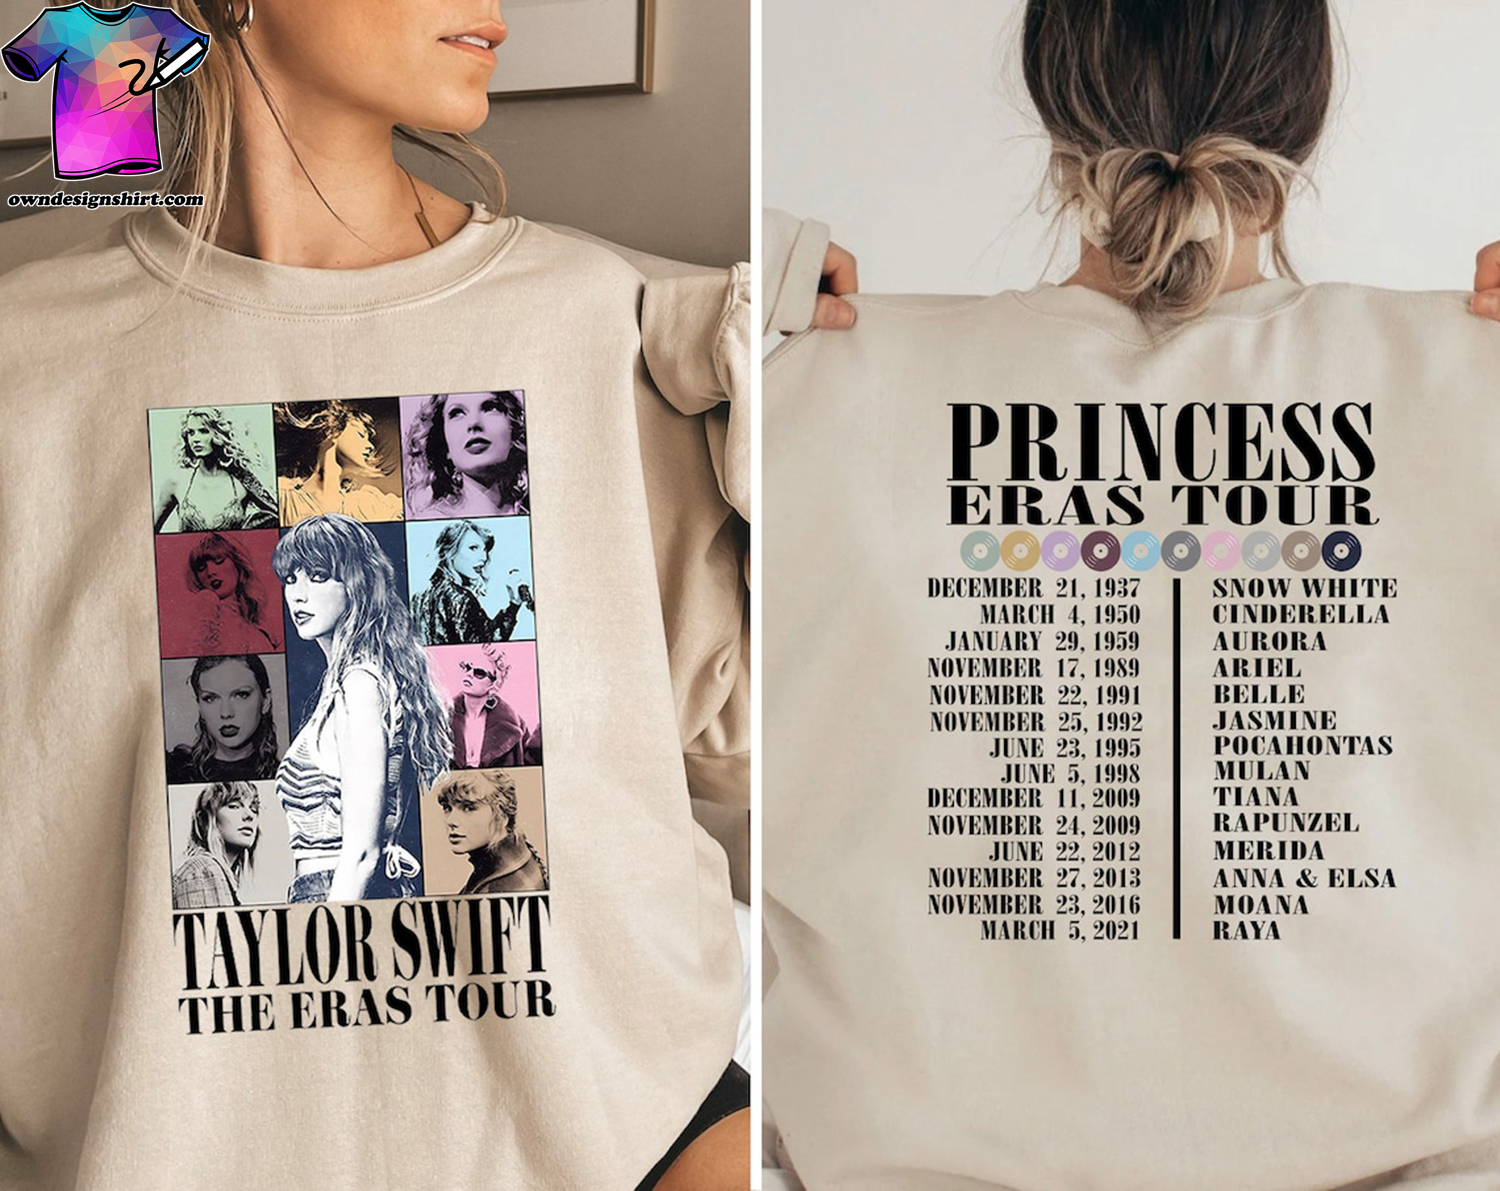 A Decade of Magic Unveiled: The Eras Tour Concert by Taylor Swift and ...